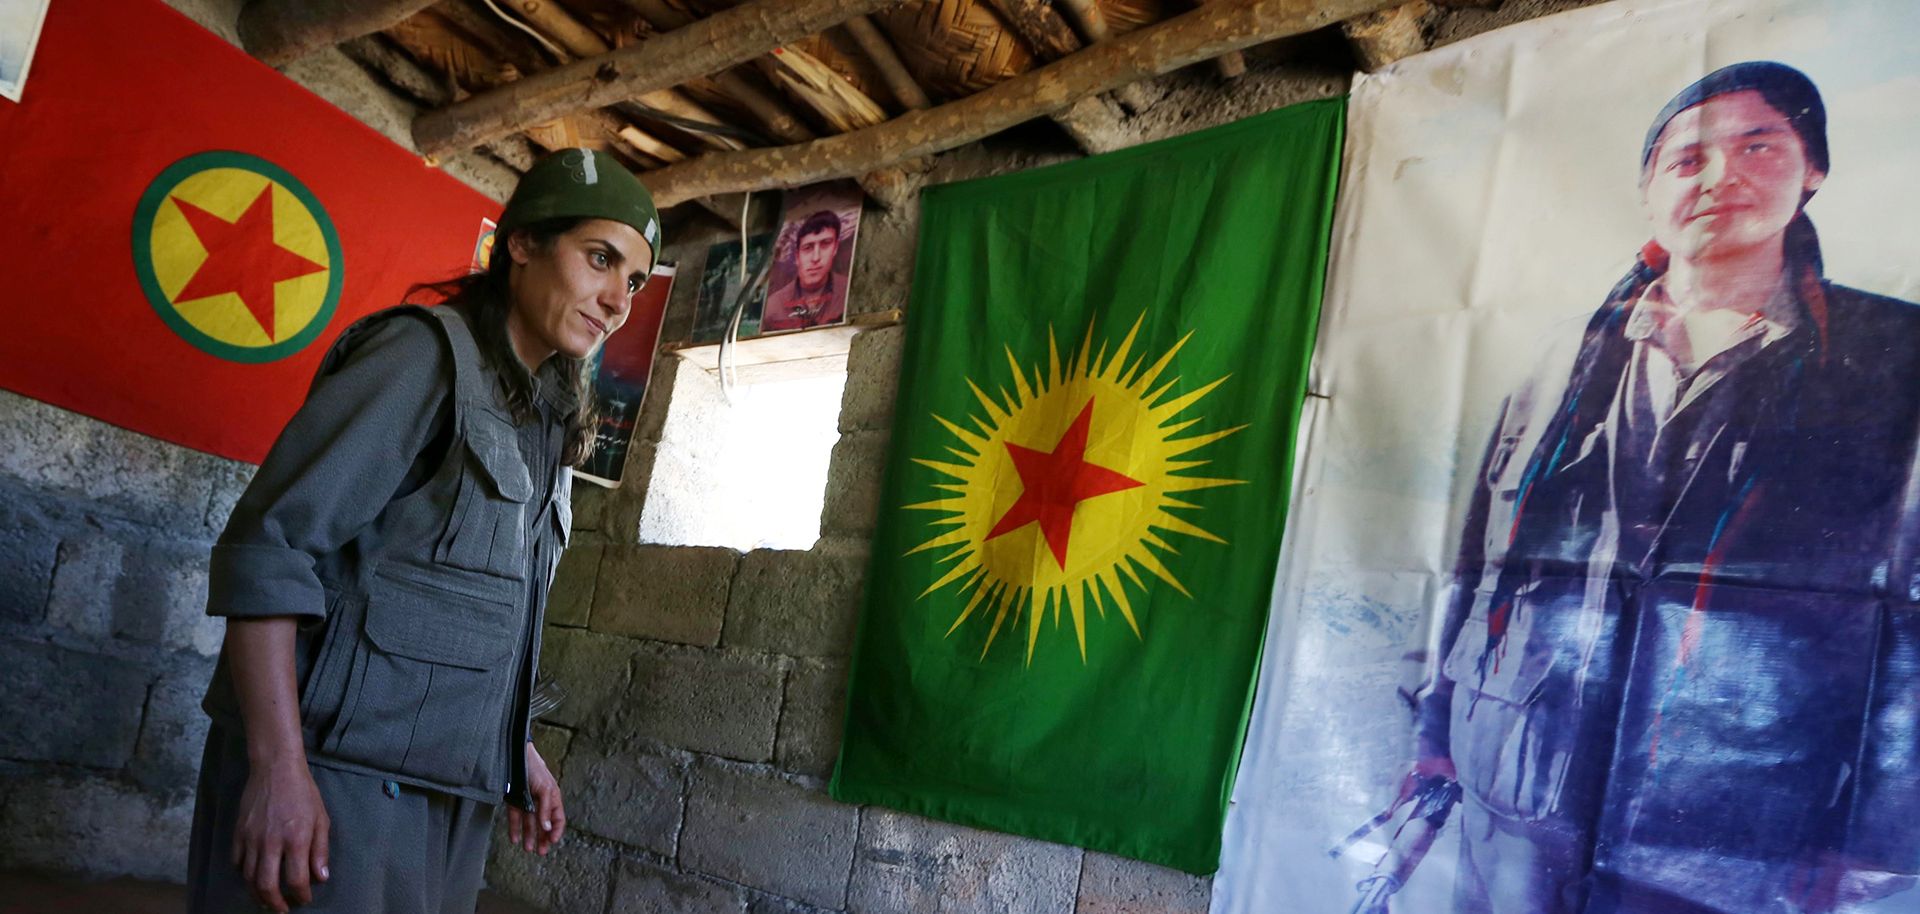 A member of the Party of Free Life of Kurdistan (PJAK) at a base in Iraq's Kurdish autonomous region in 2014. Kurdish groups in the Middle East are newly empowered because of the support they received to fight the Islamic State.